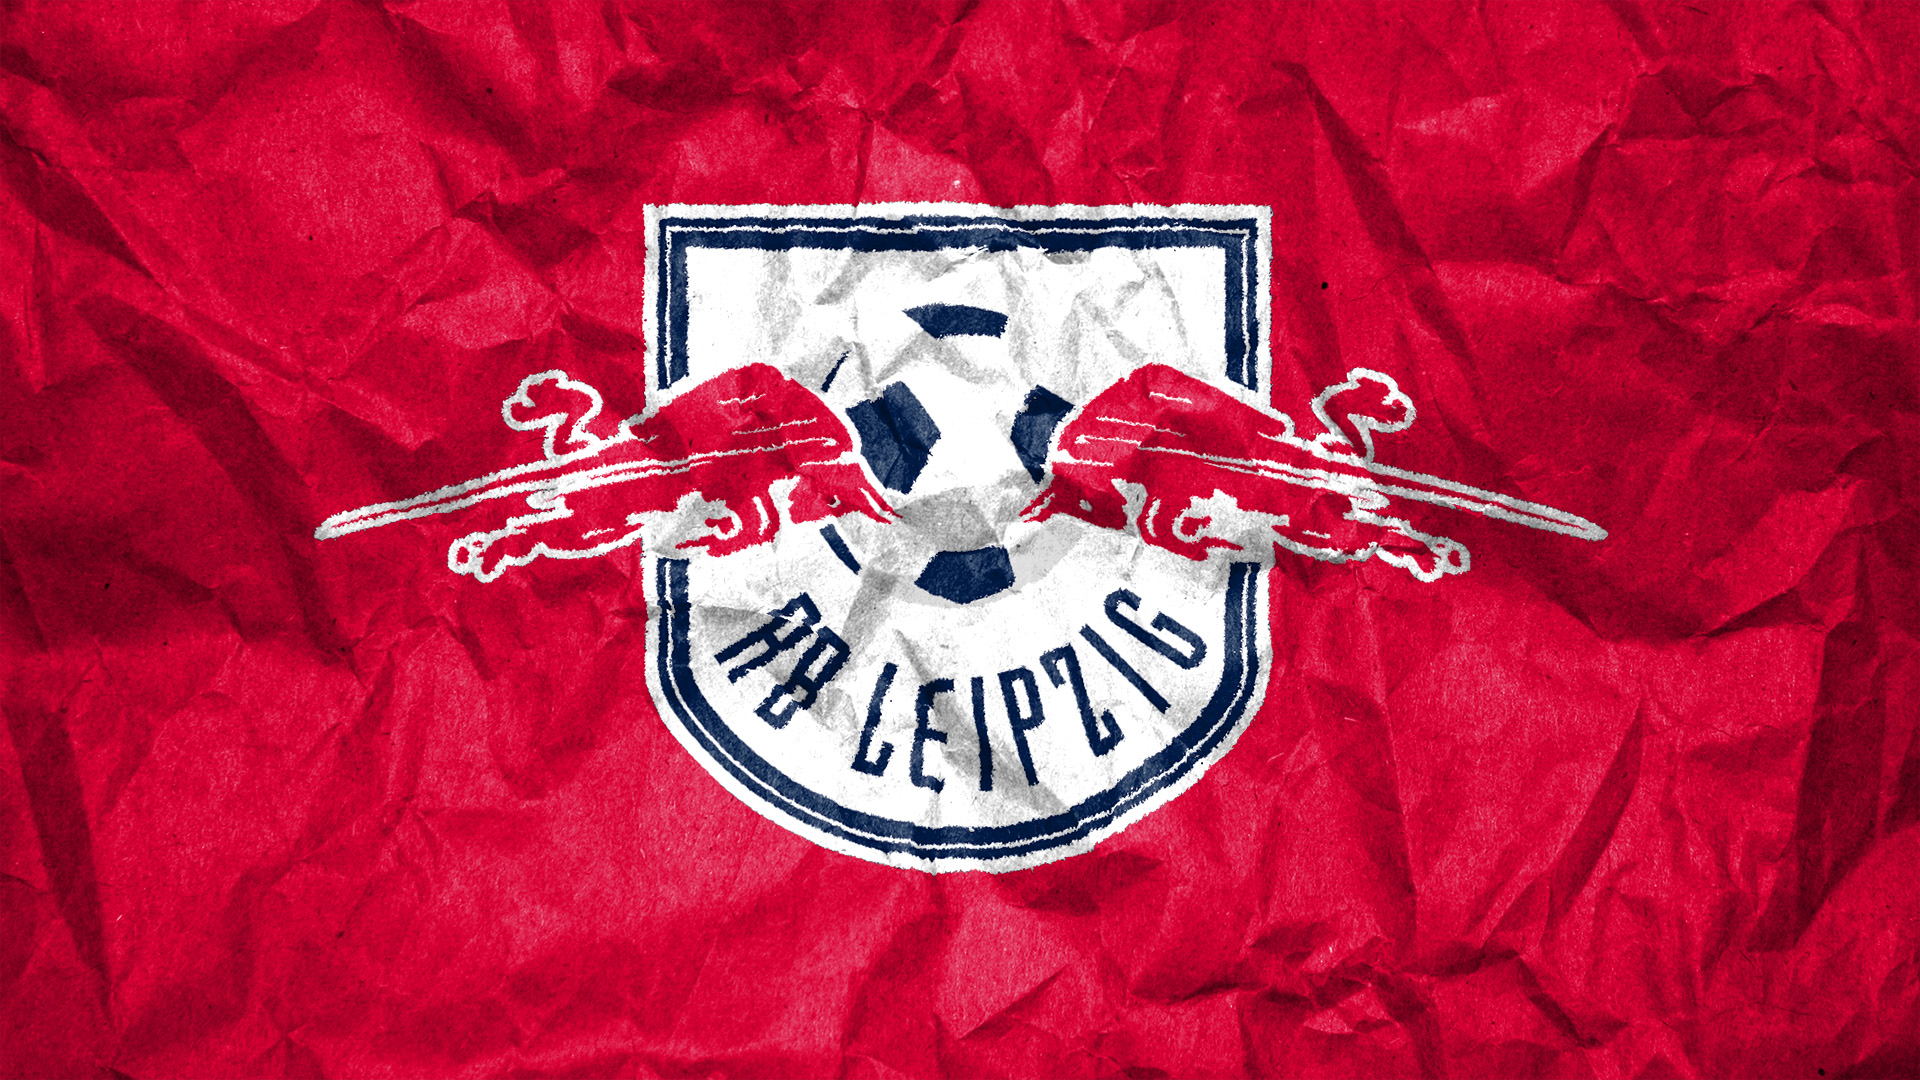 Rb Leipzig Wallpaper Posted By Samantha Thompson